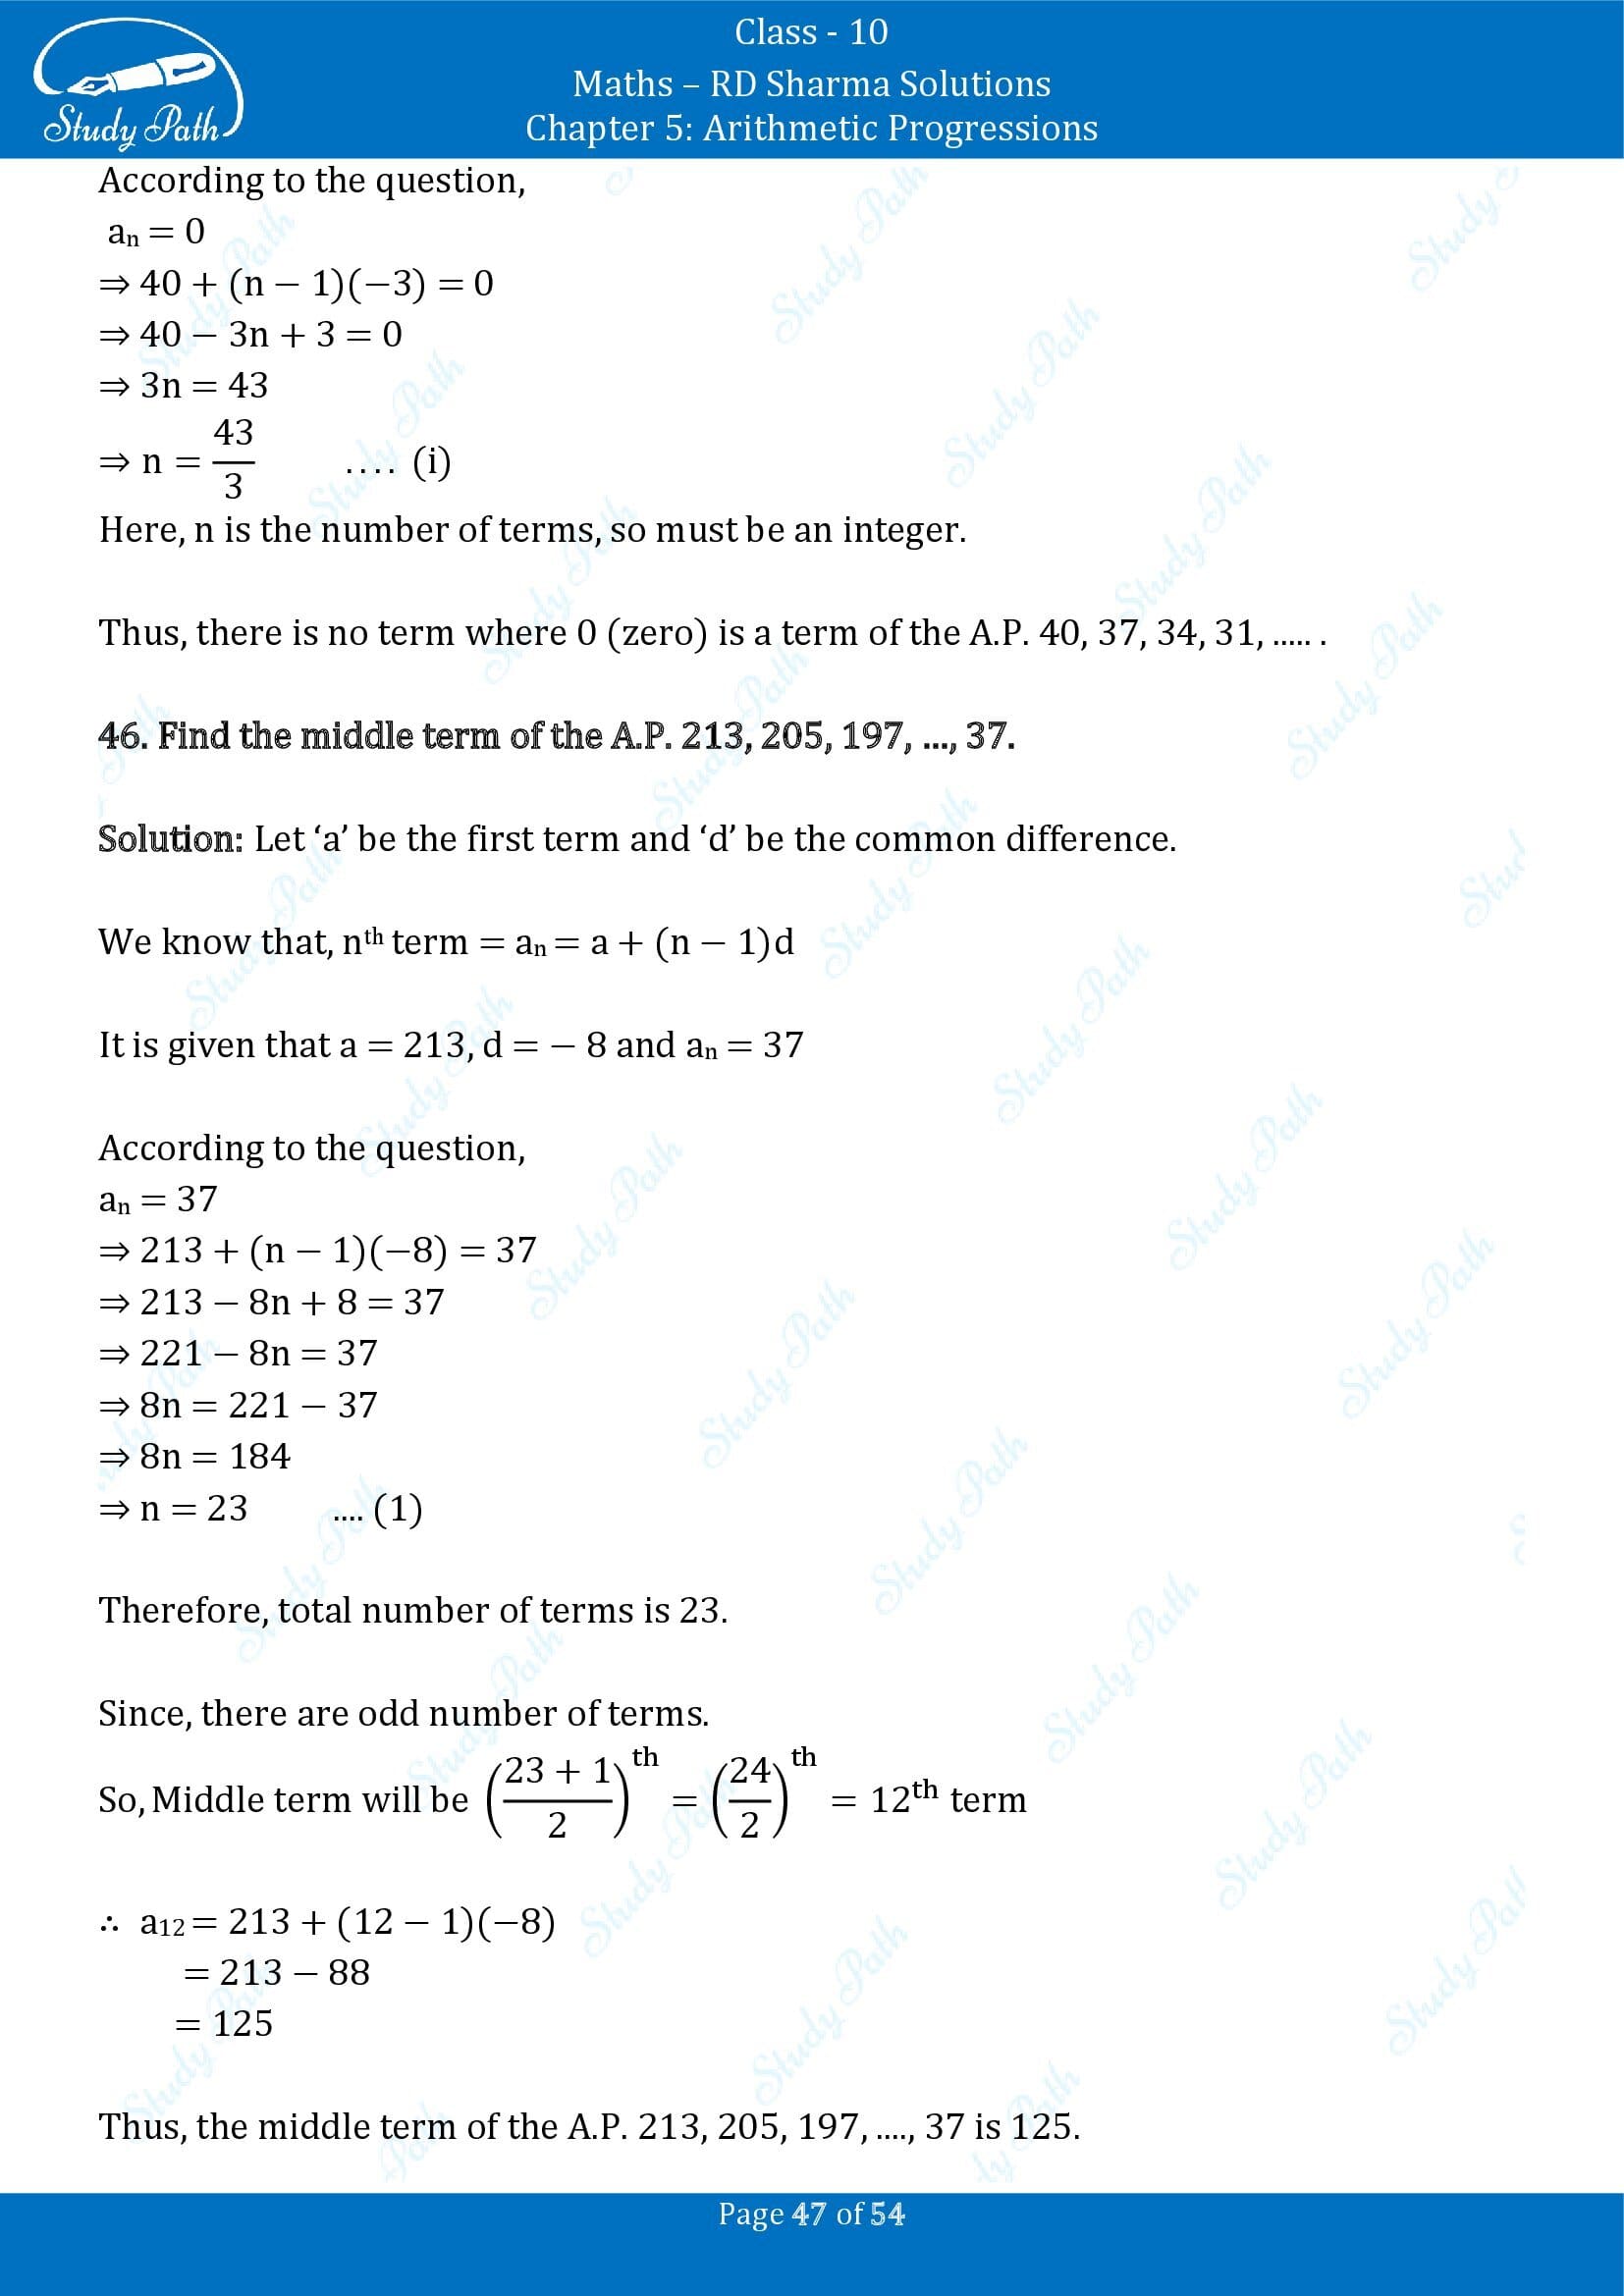 RD Sharma Solutions Class 10 Chapter 5 Arithmetic Progressions Exercise 5.4 00047